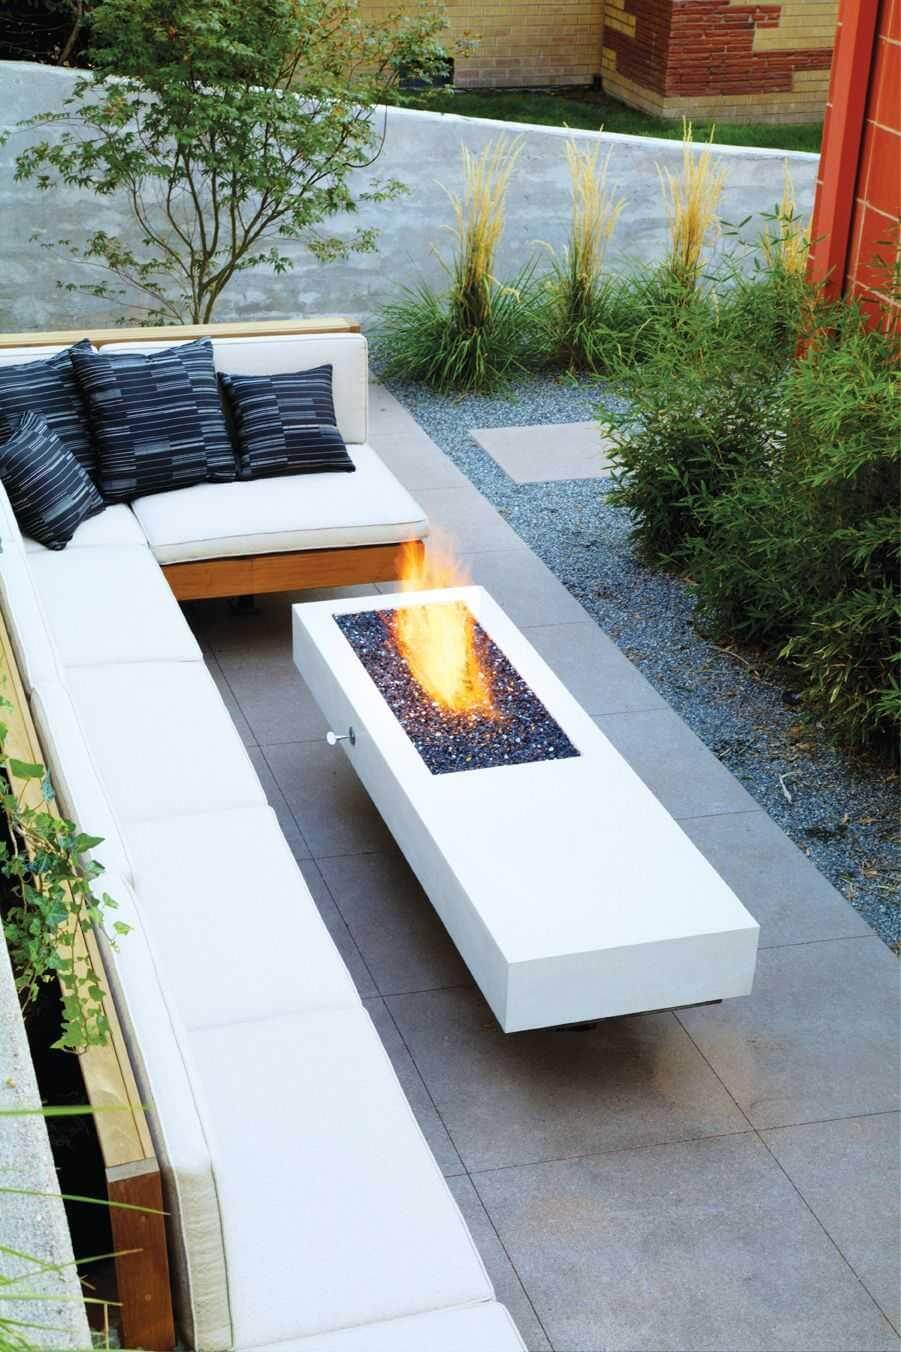 Fireplace to Light It Up